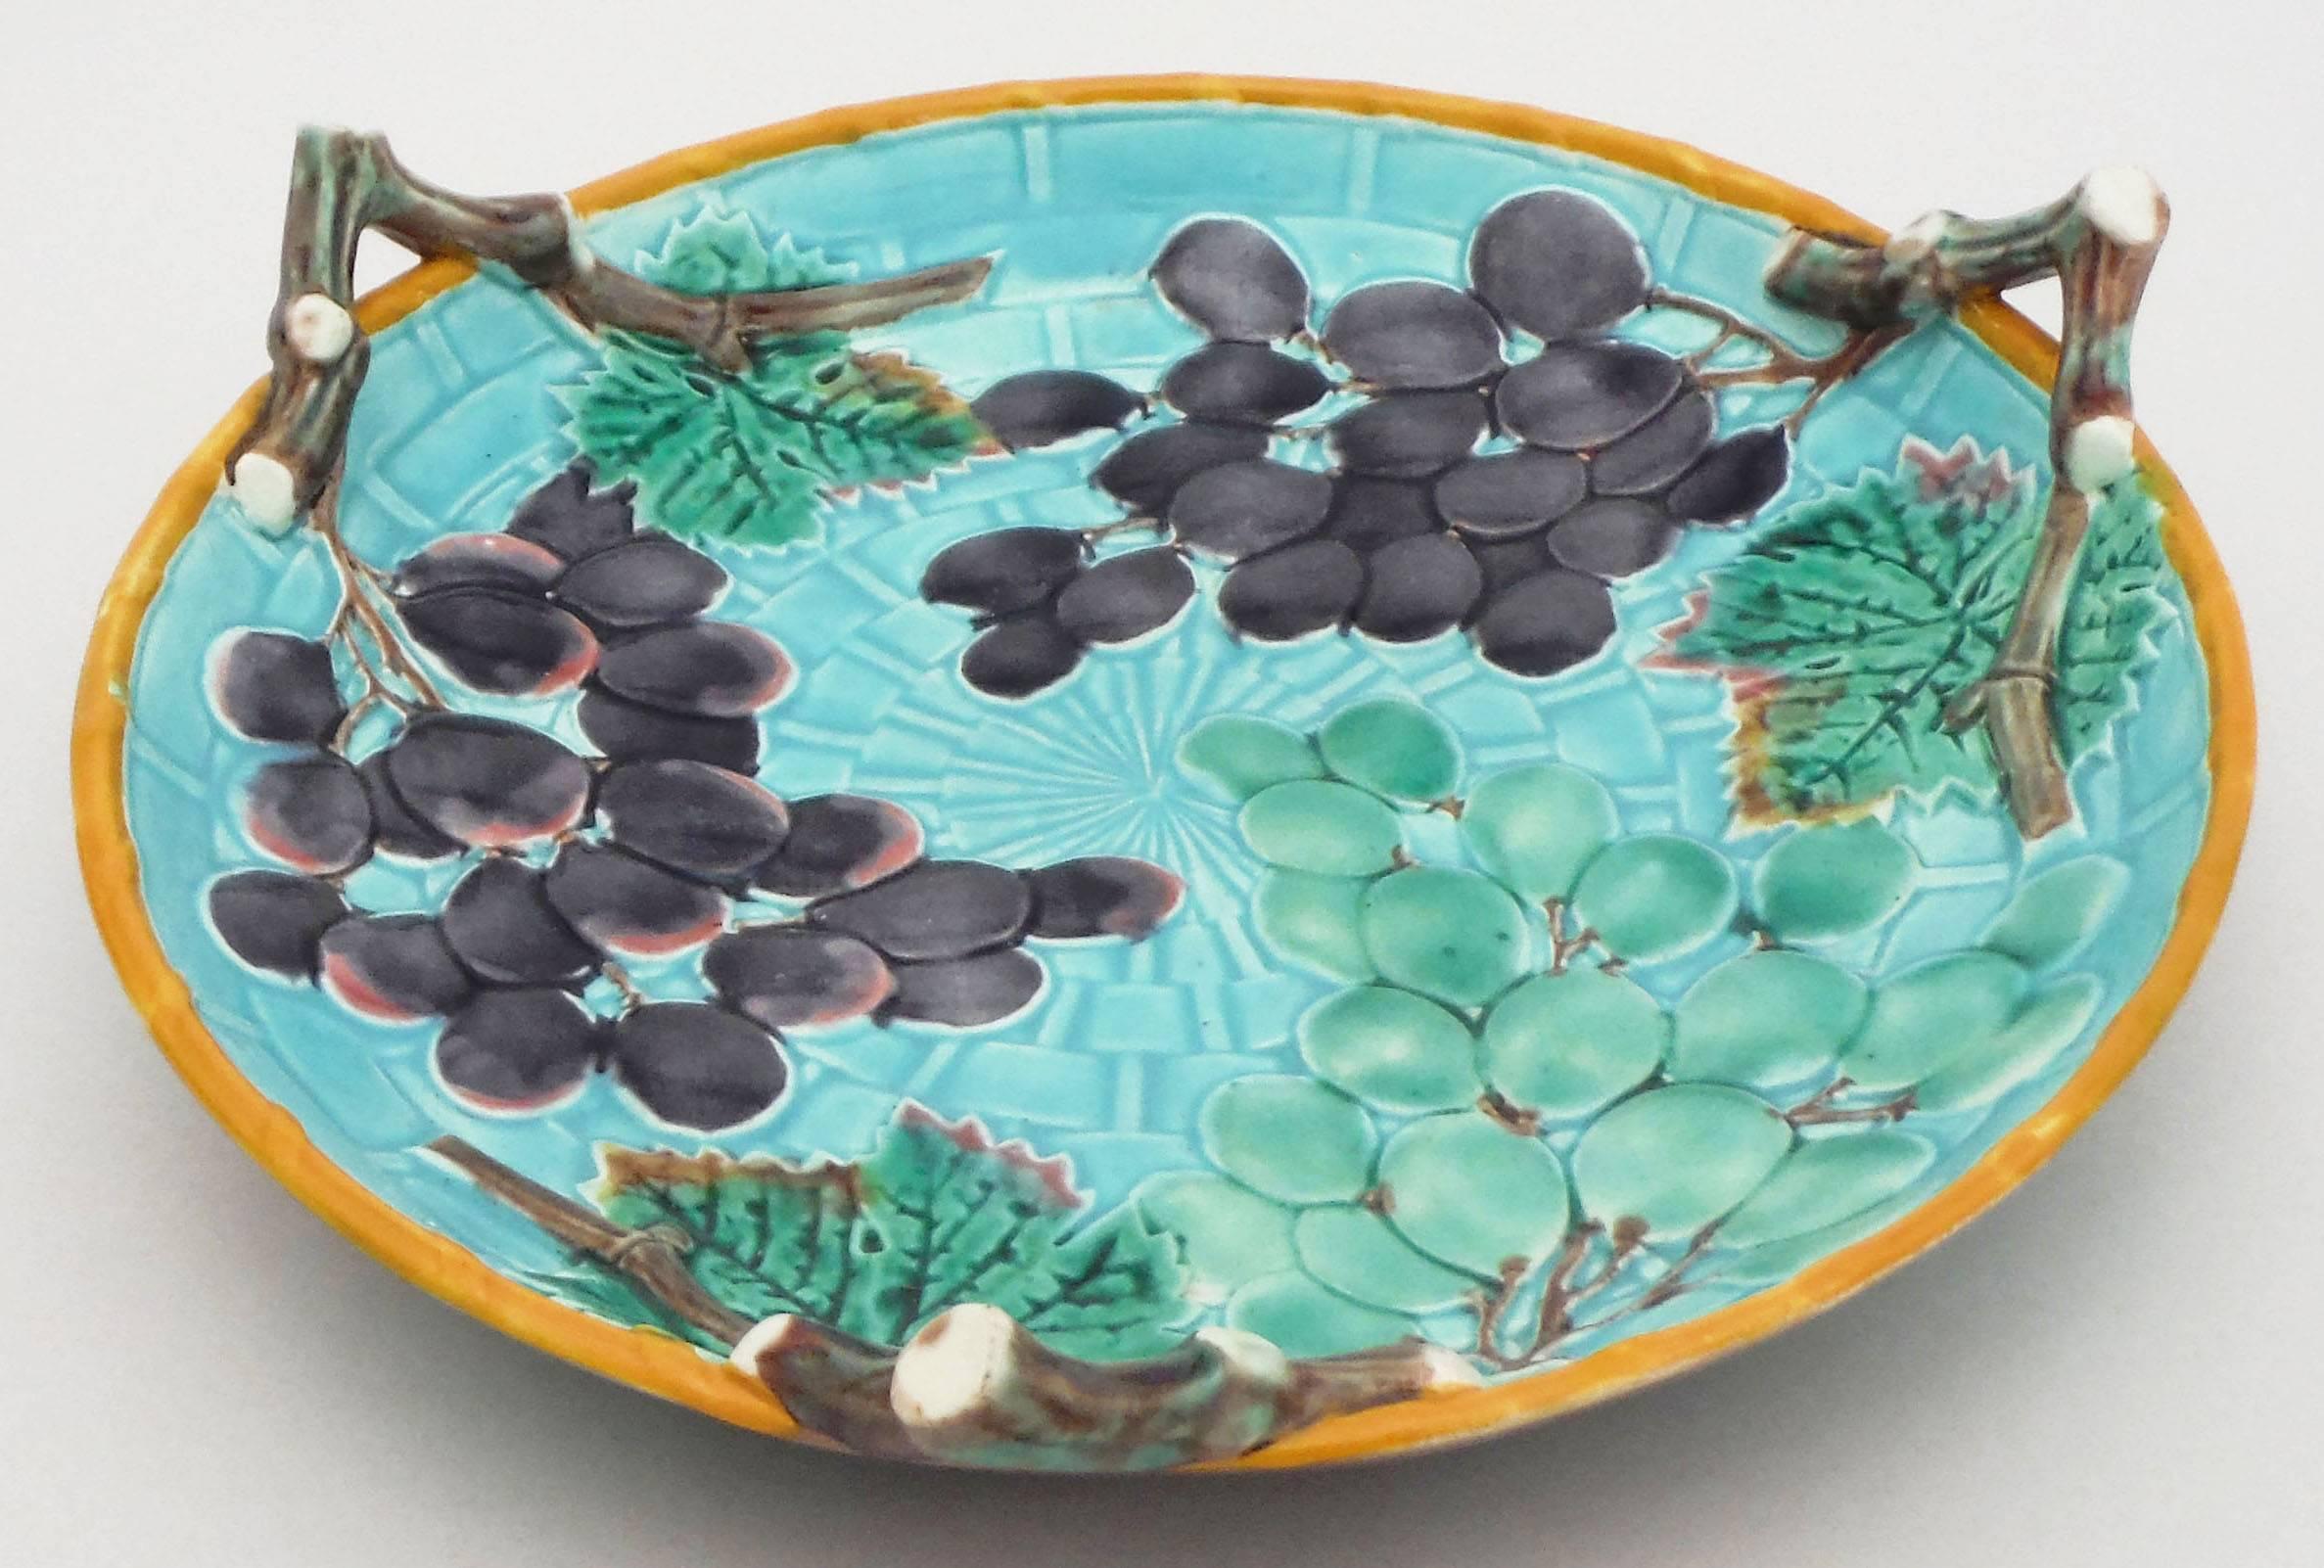 Colorful and lovely turquoise Majolica handled platter with grapes signed Wedgwood.
The three handles are branches, the background is a aqua basketweave with a thin yellow border.